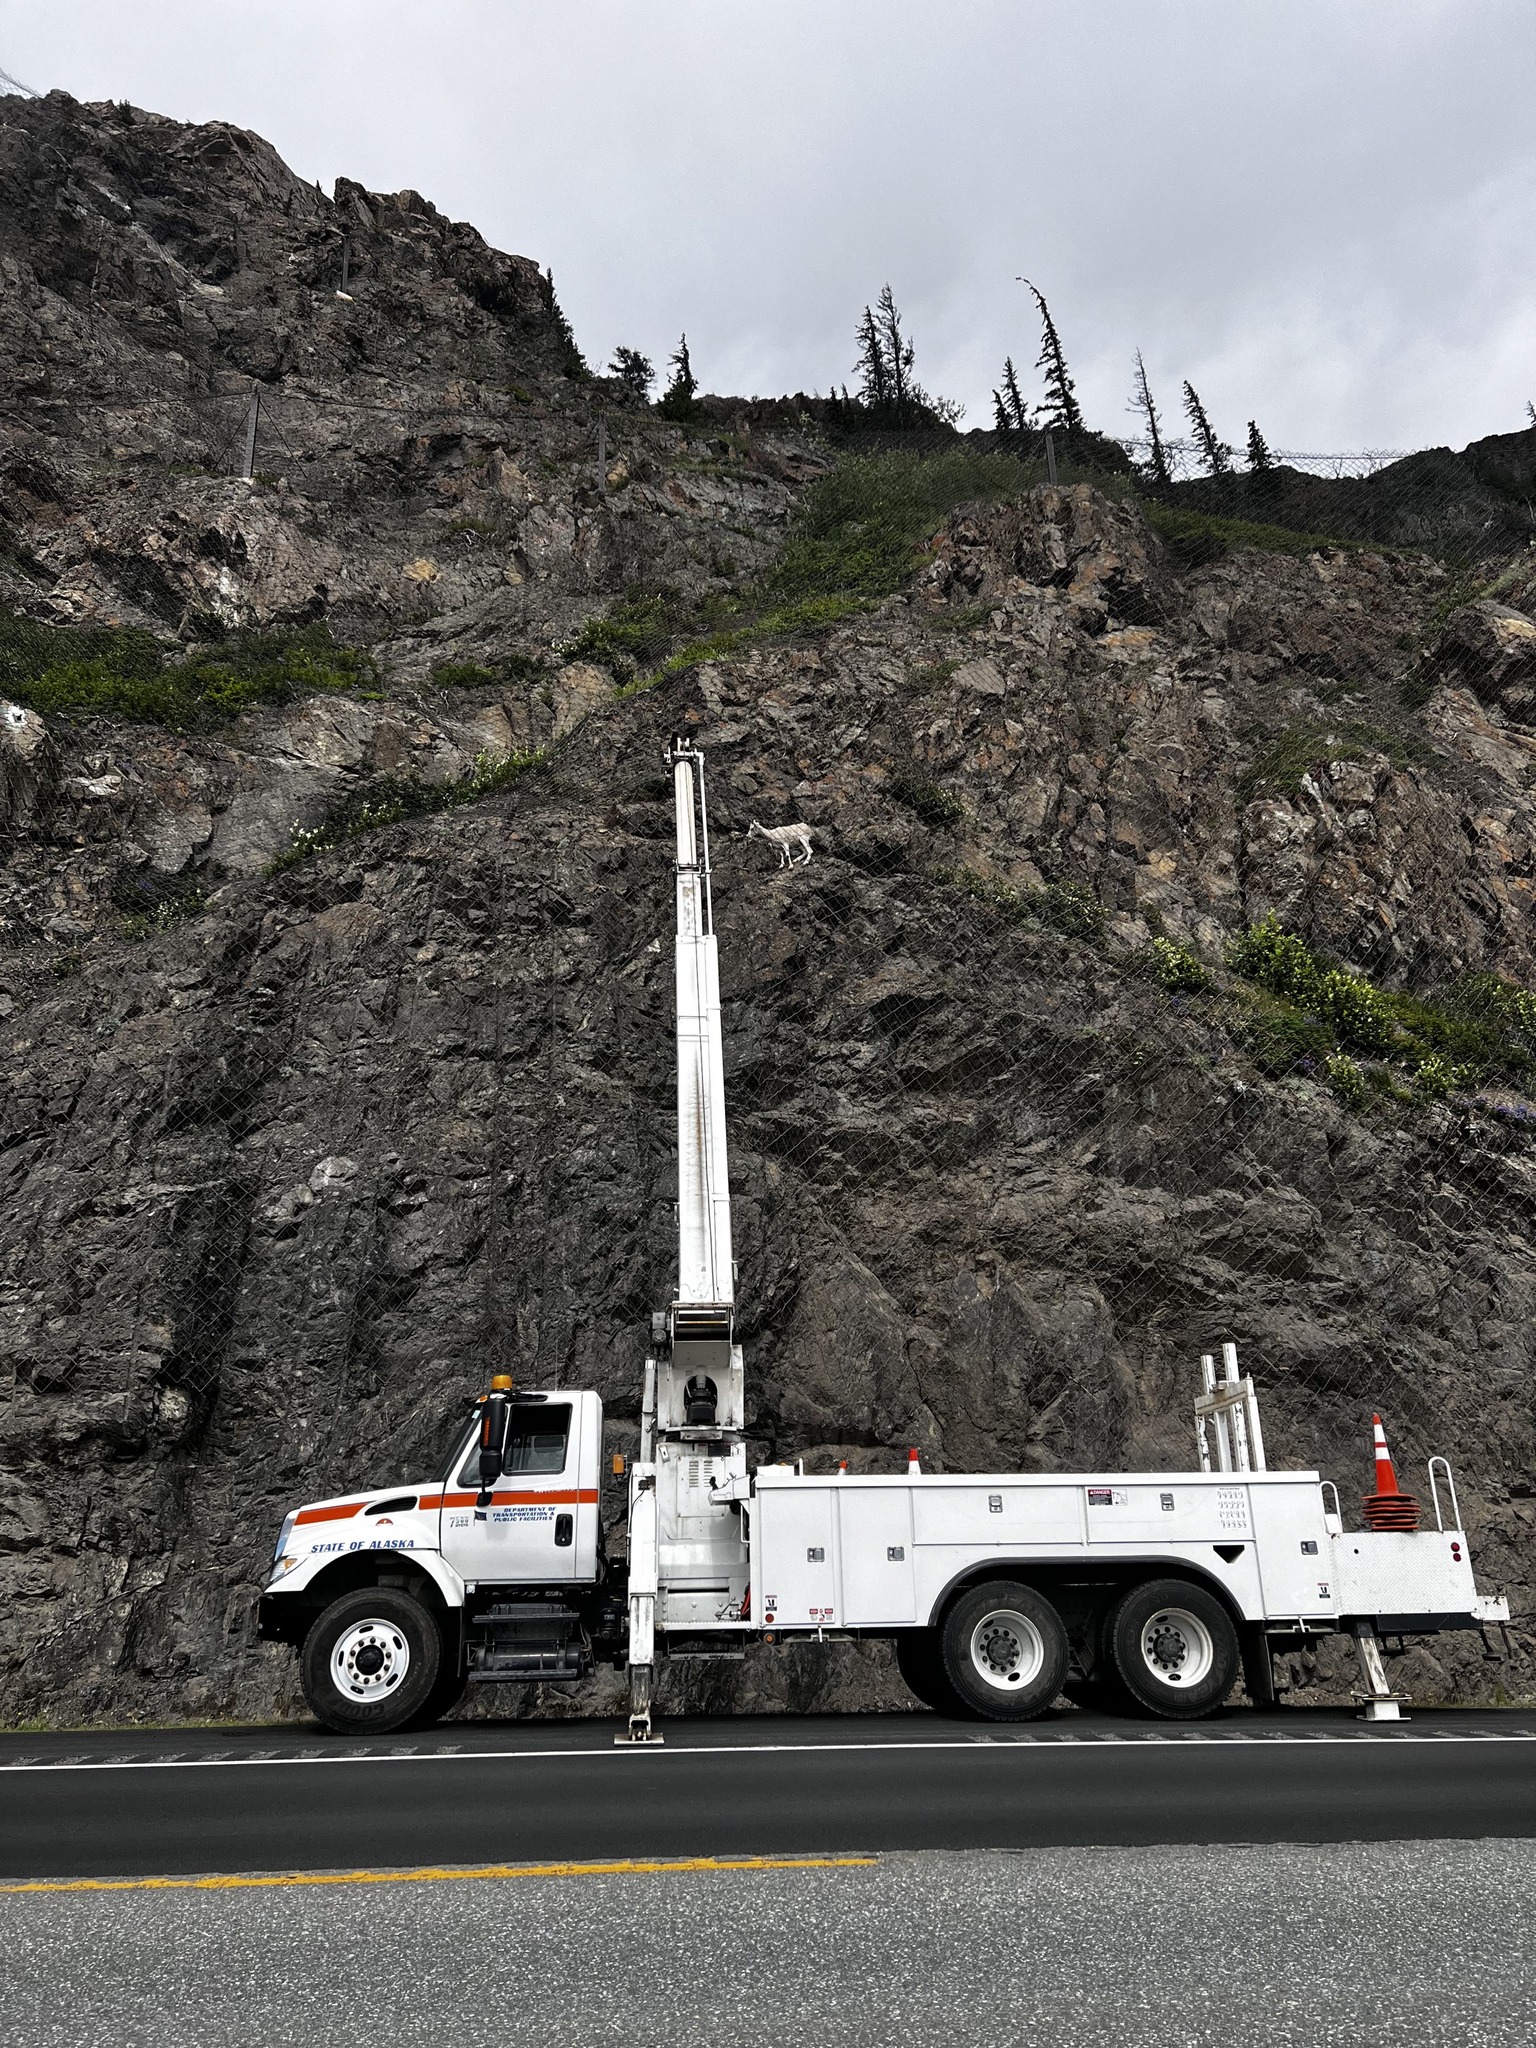 a truck with a boom arm extended toward a sheep on a steep rock wall